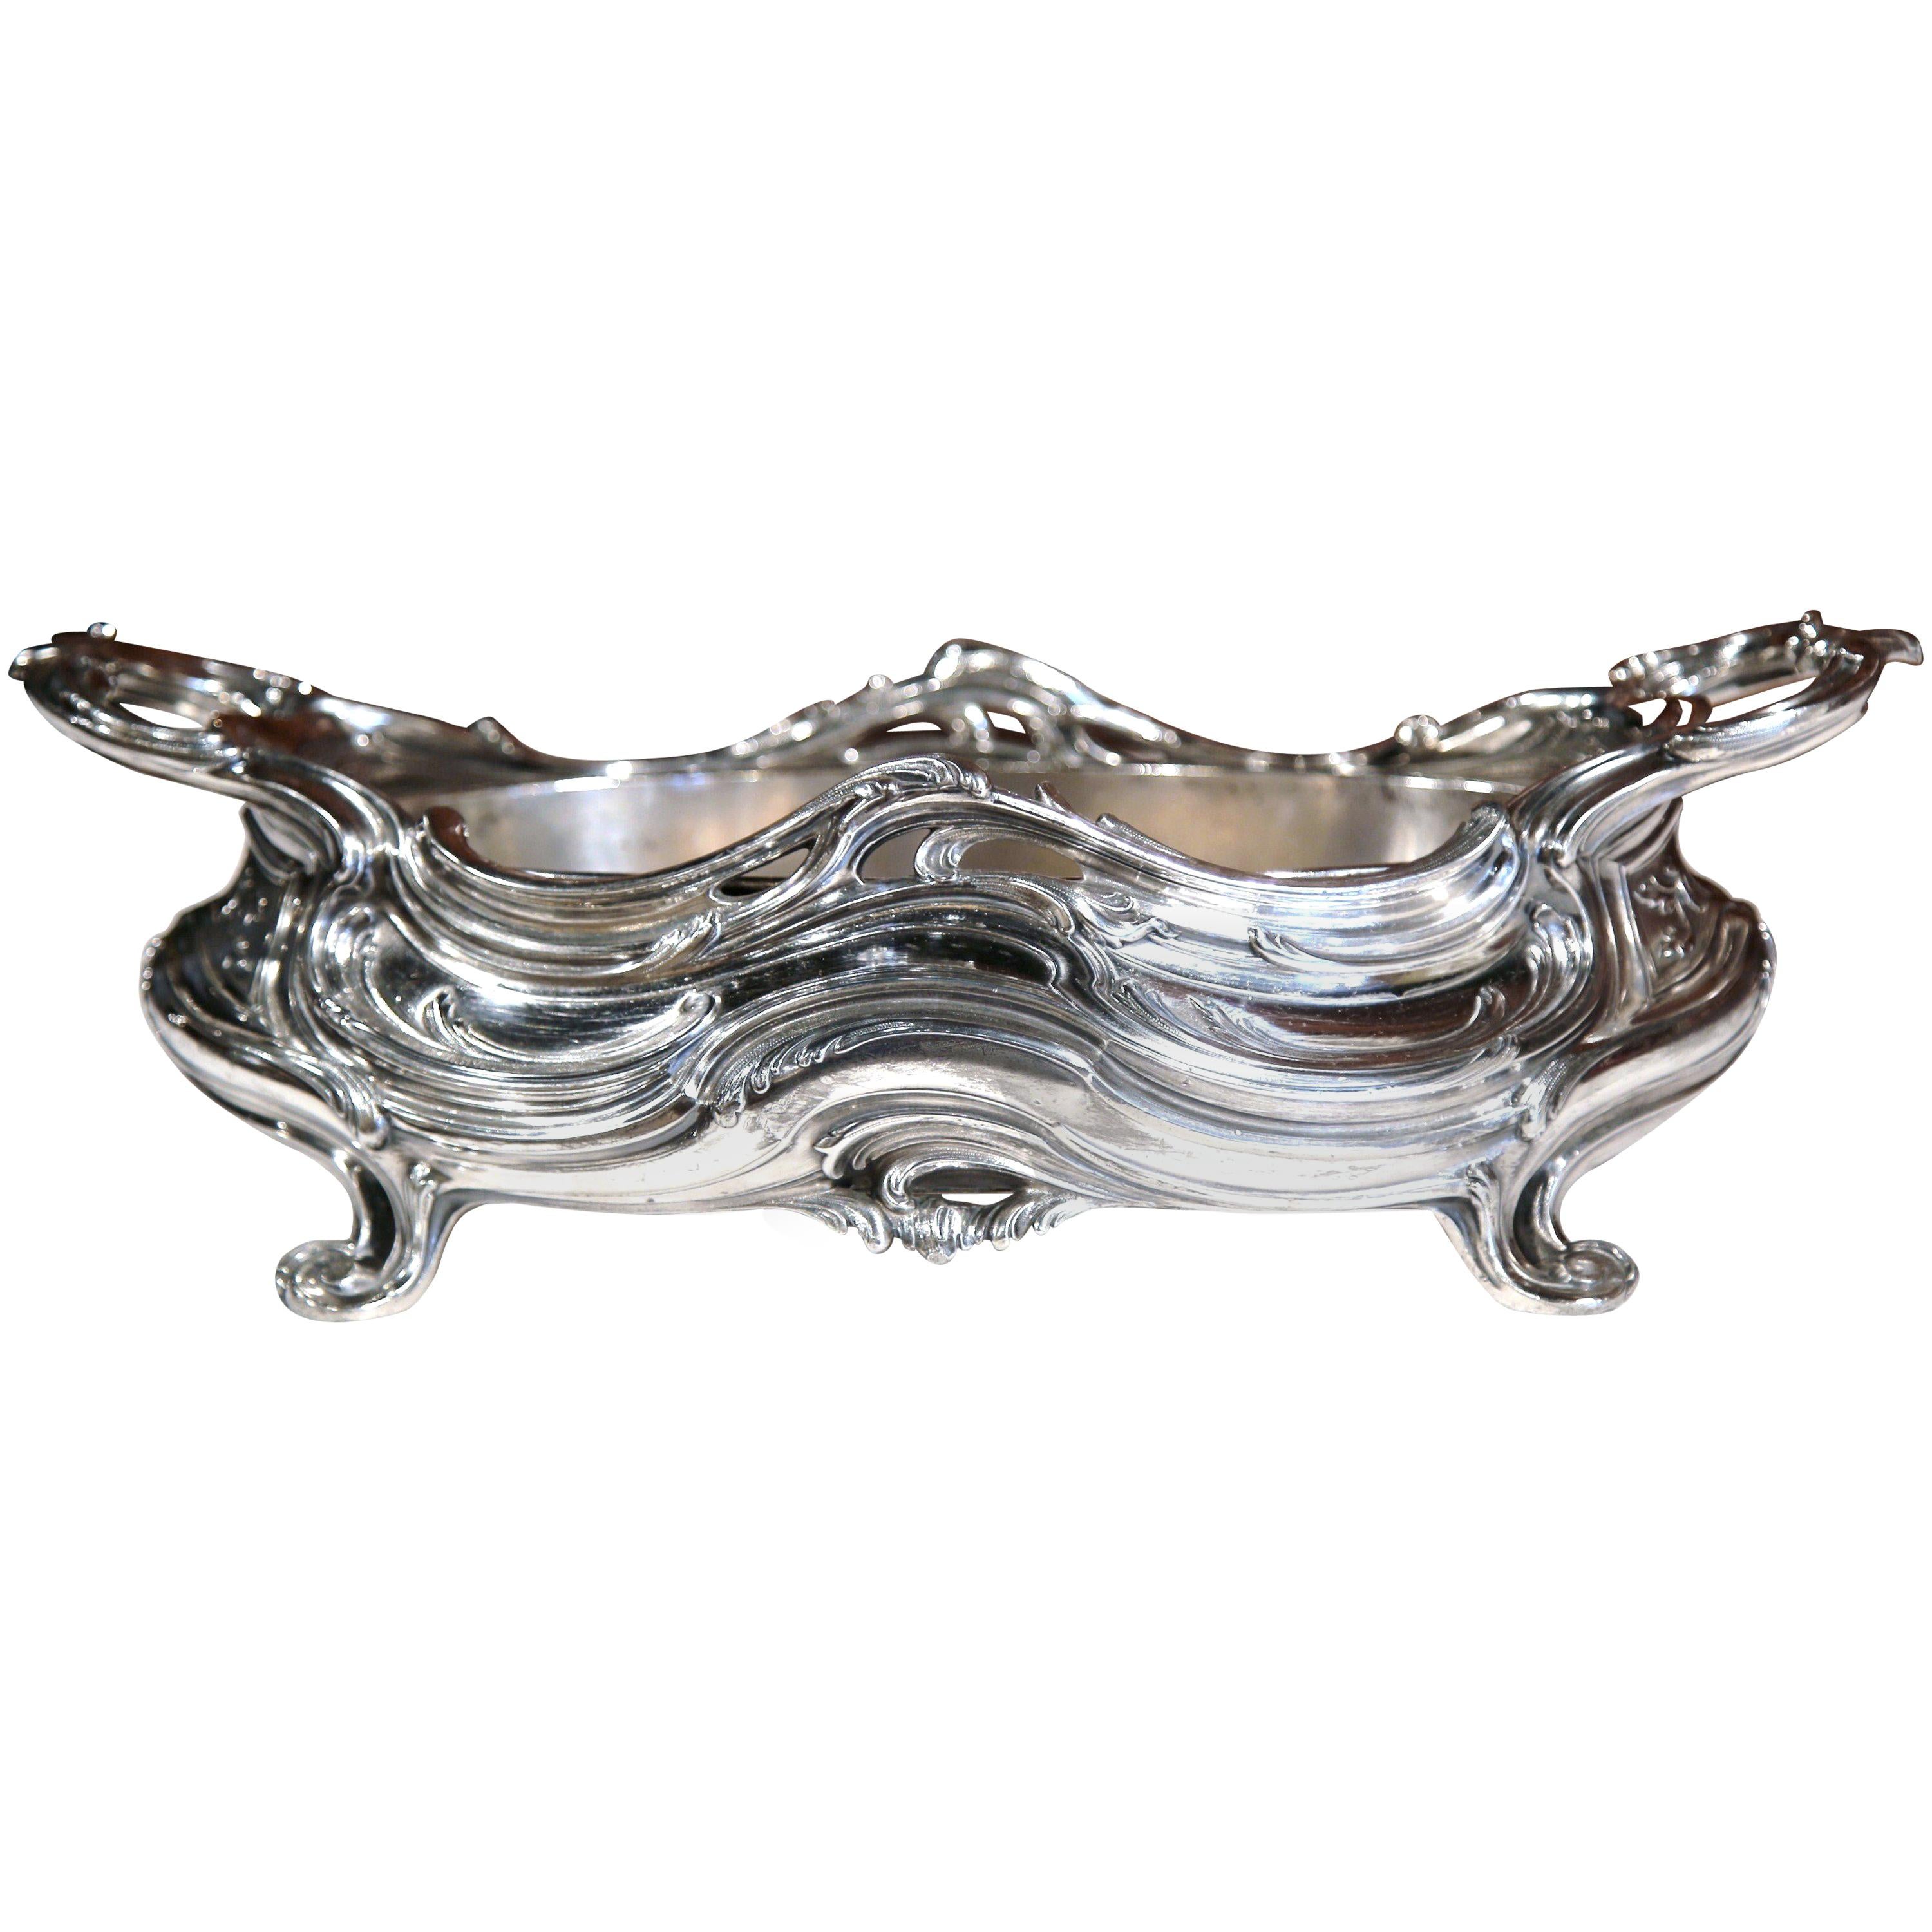 19th Century French Louis XV Silver Plated over Pewter Jardinière